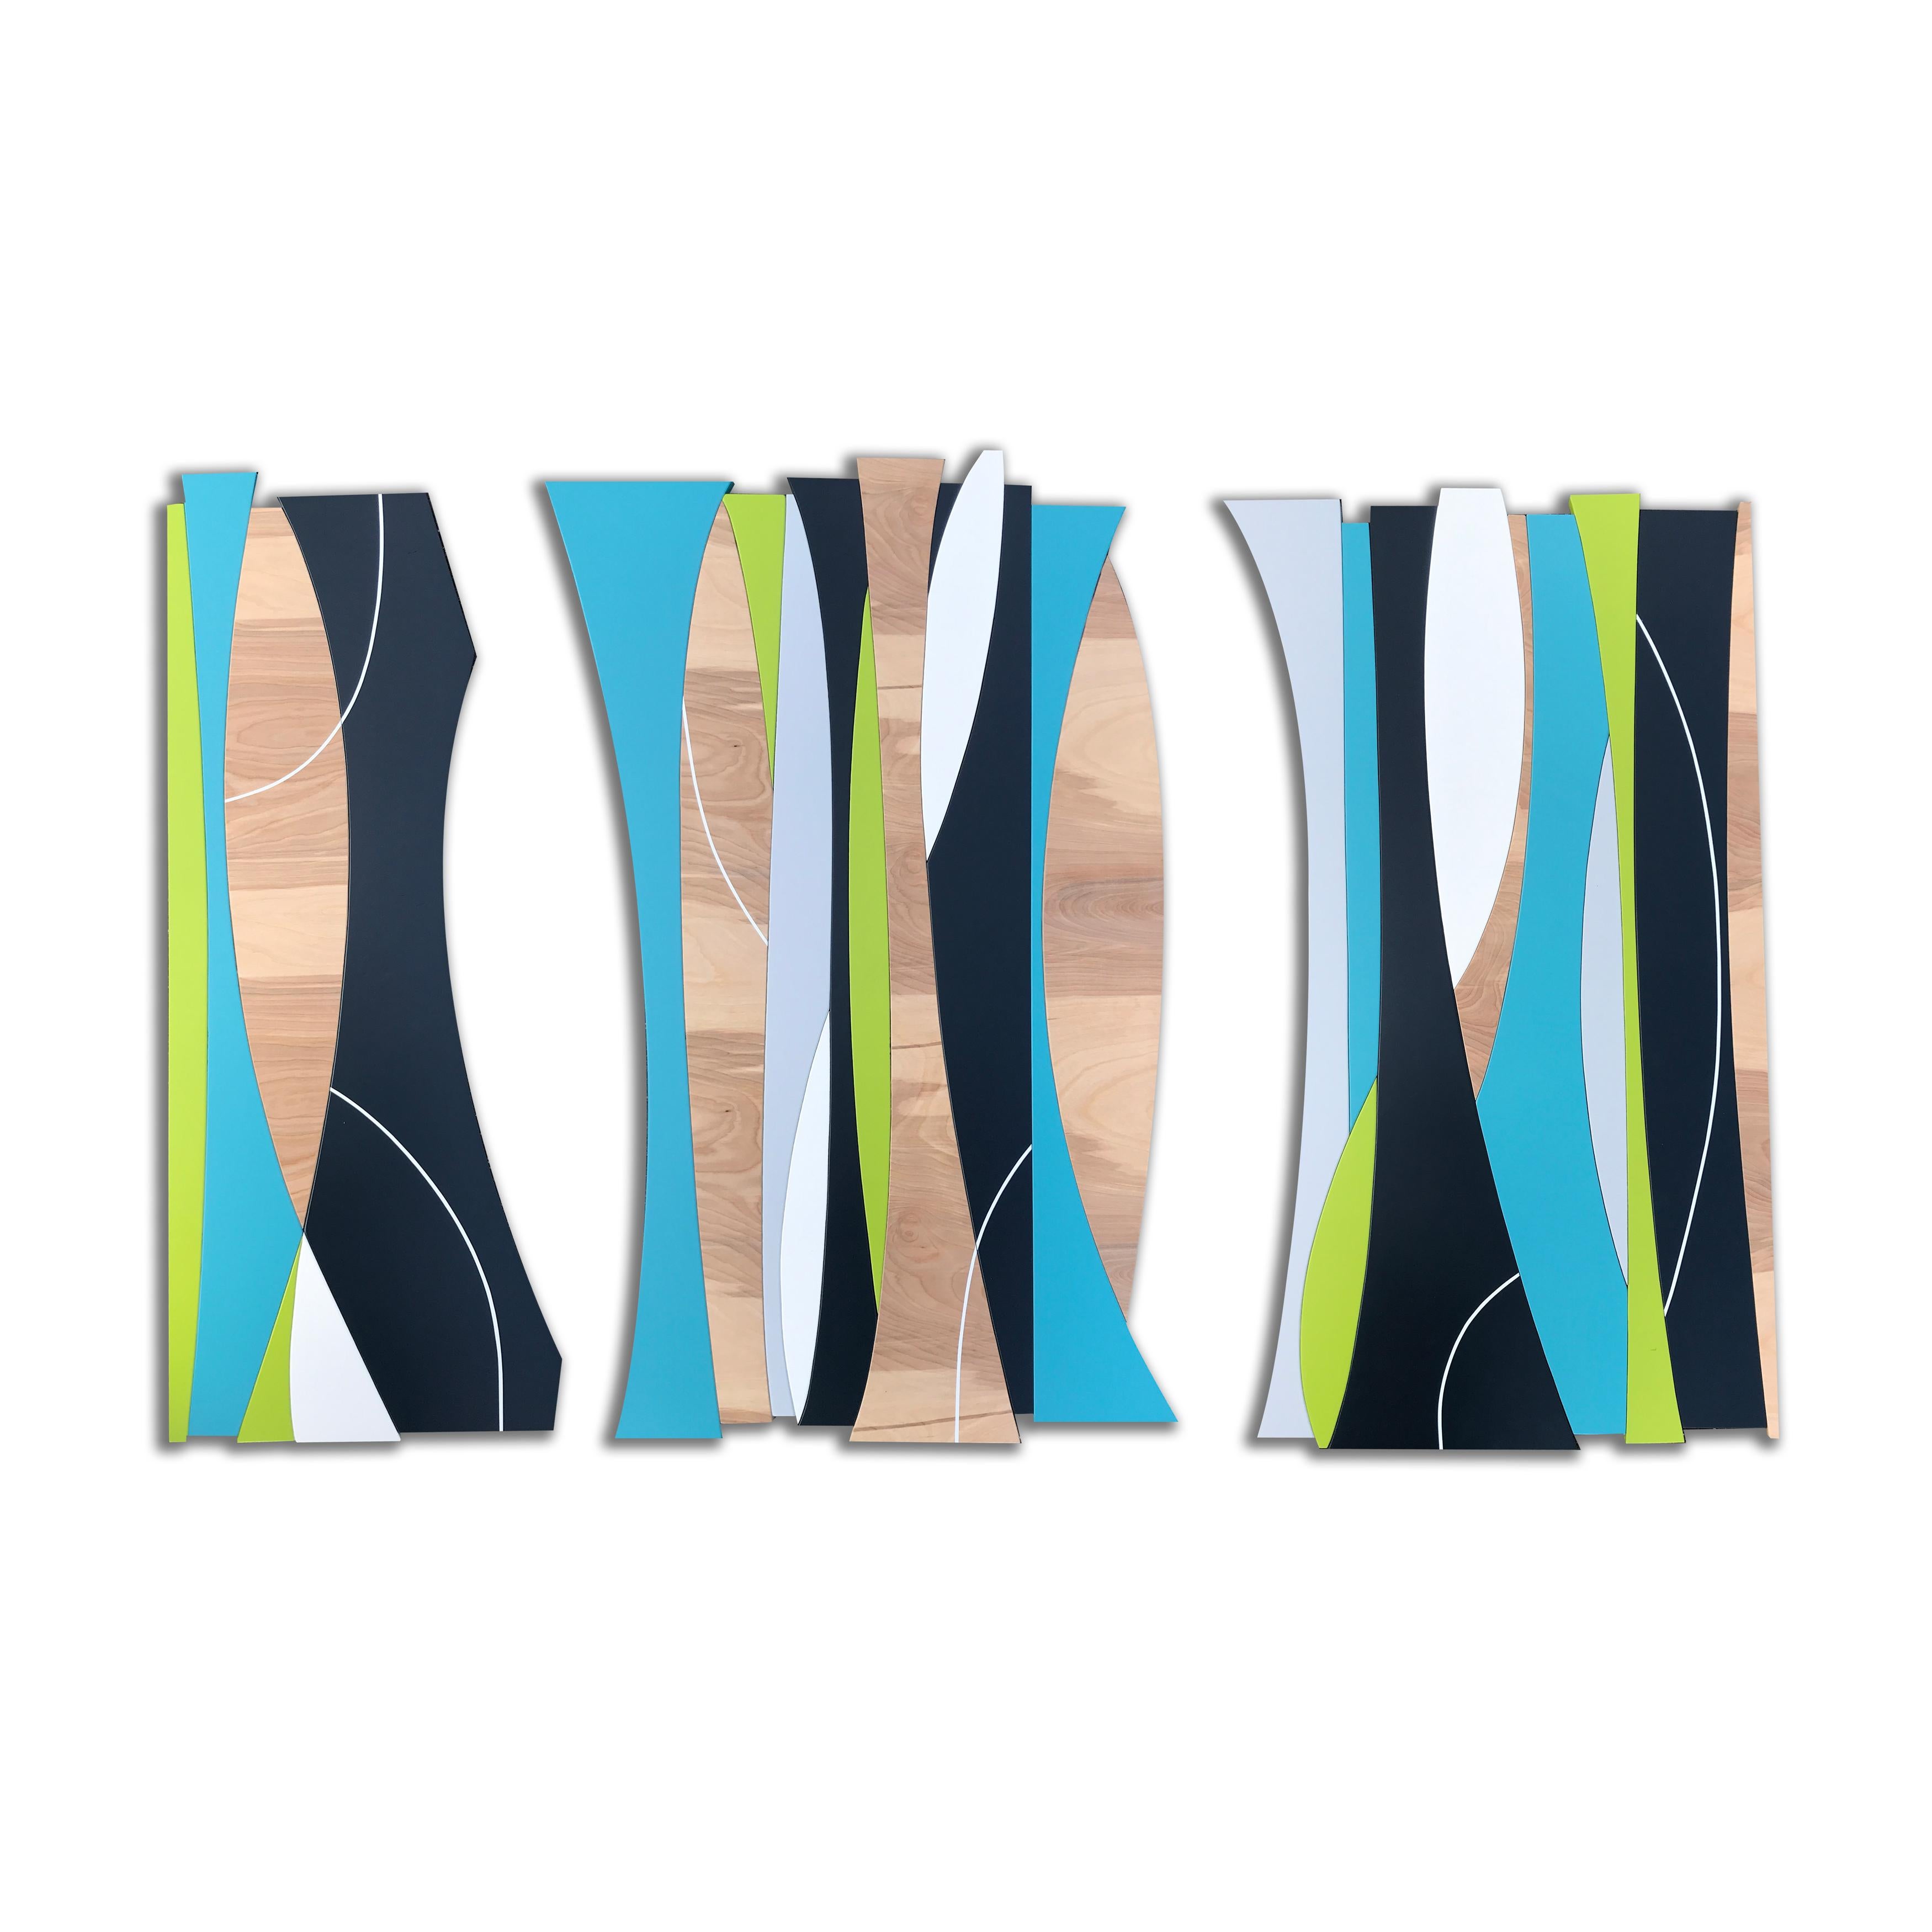 Scott Troxel Abstract Sculpture - "Solar Trees" Wood Wall Sculpture, mid century modern, lime, blue, gray, white